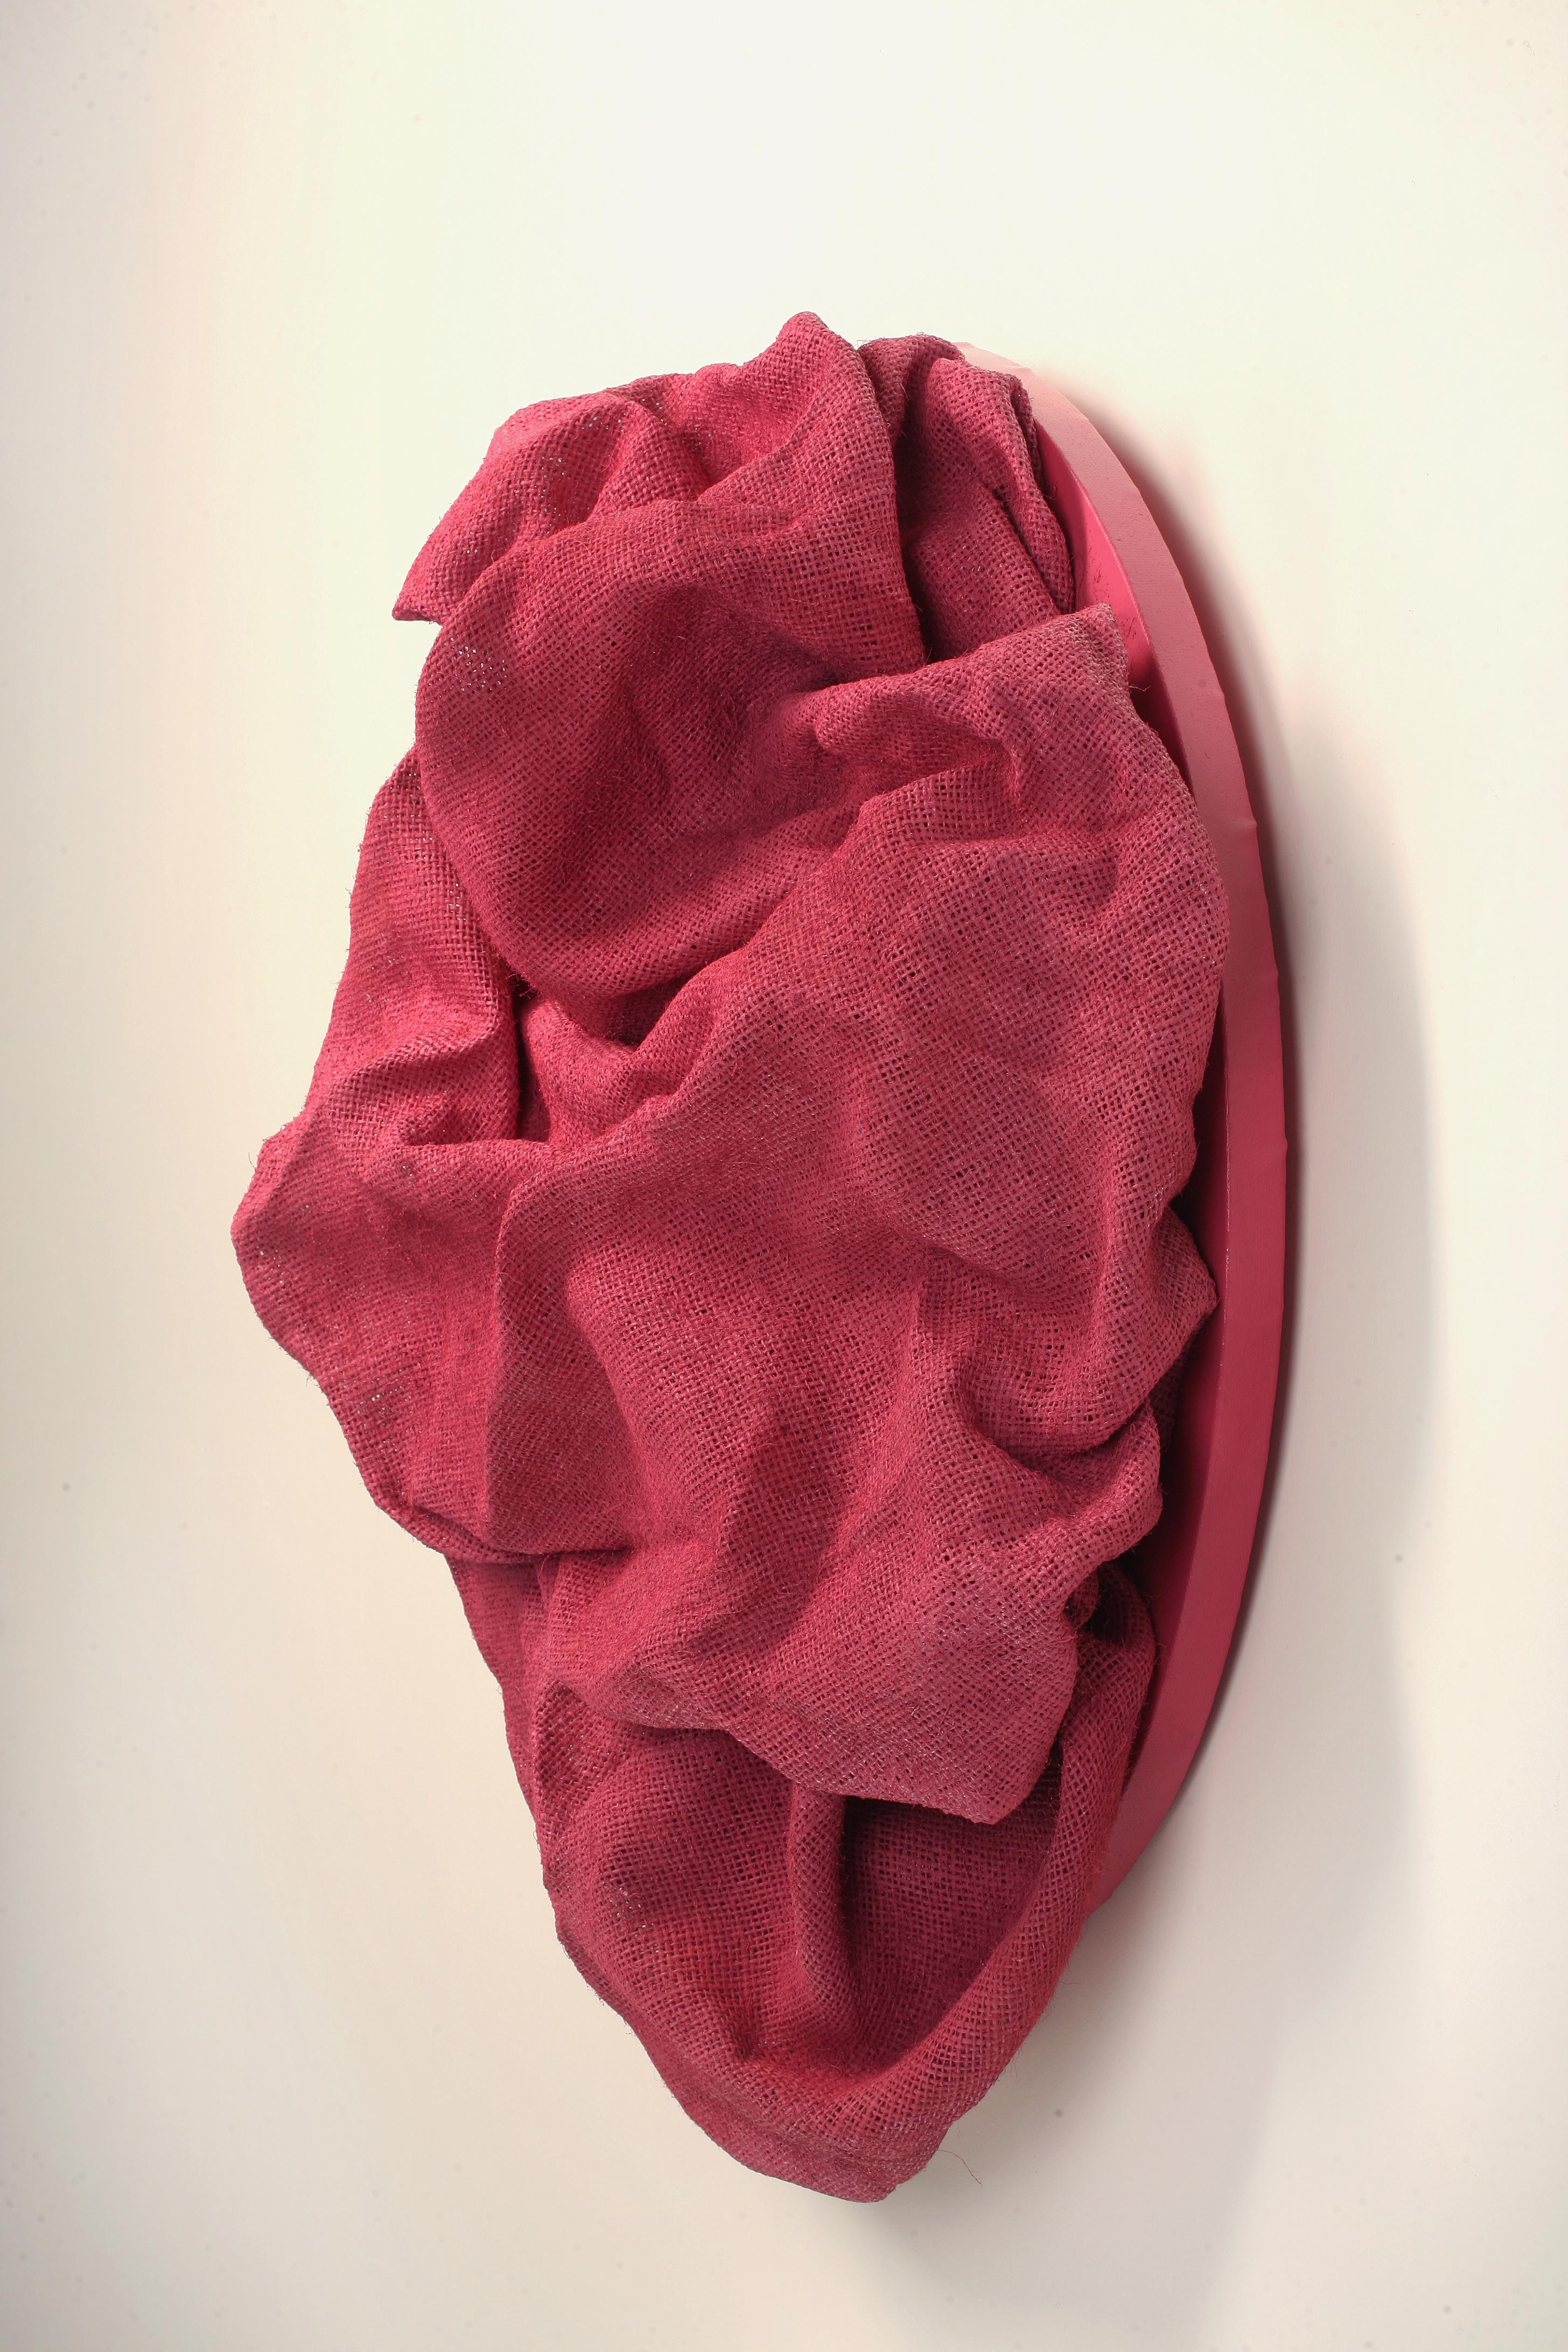 Watermelon Folds (Fabric, red, wall sculpture, contemporary design, textile art) - Contemporary Sculpture by Chloe Hedden